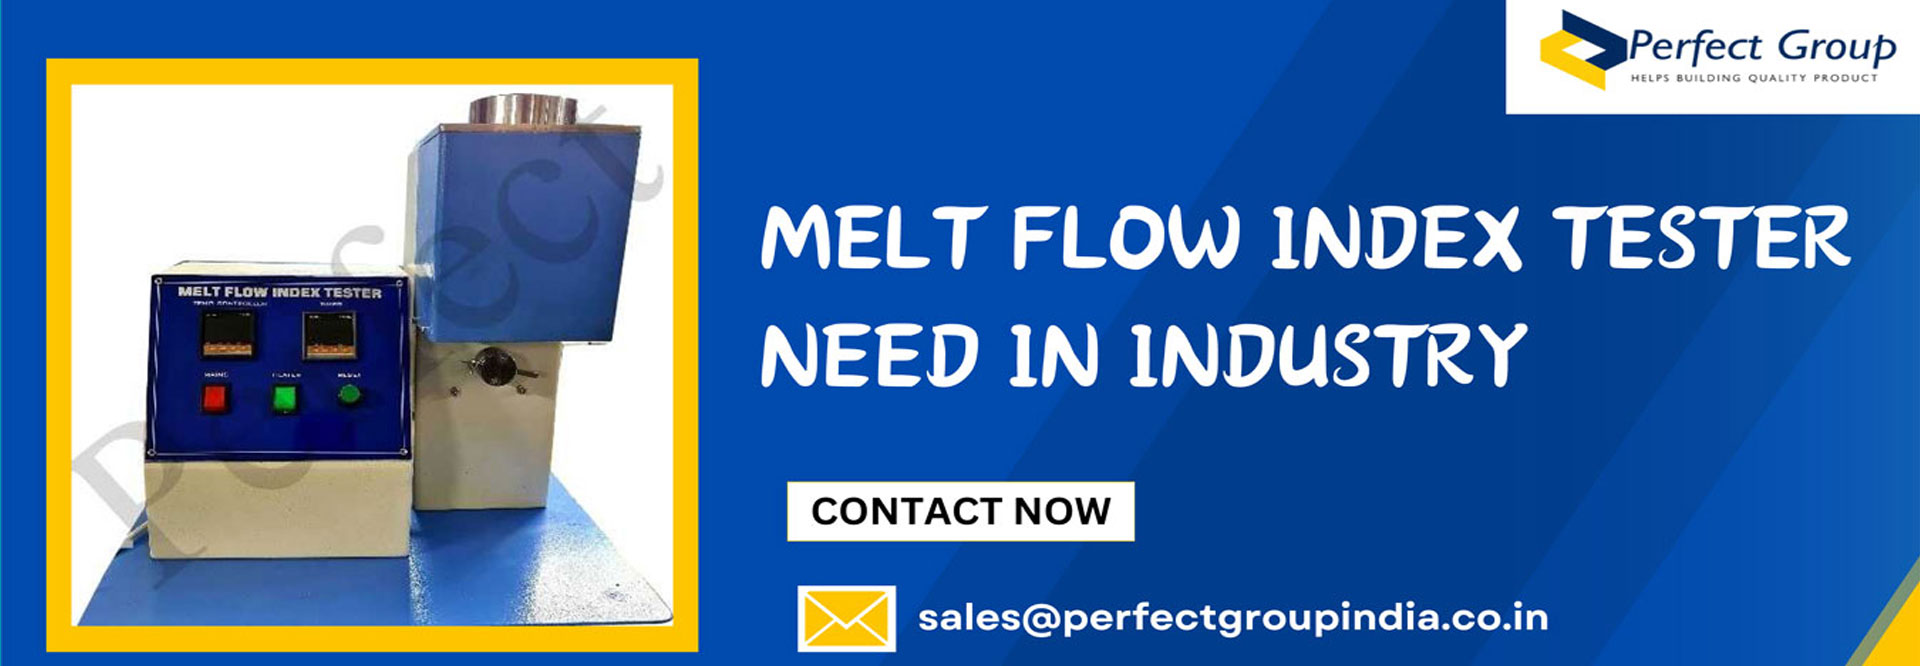 Melt Flow Index Tester Need In Industry